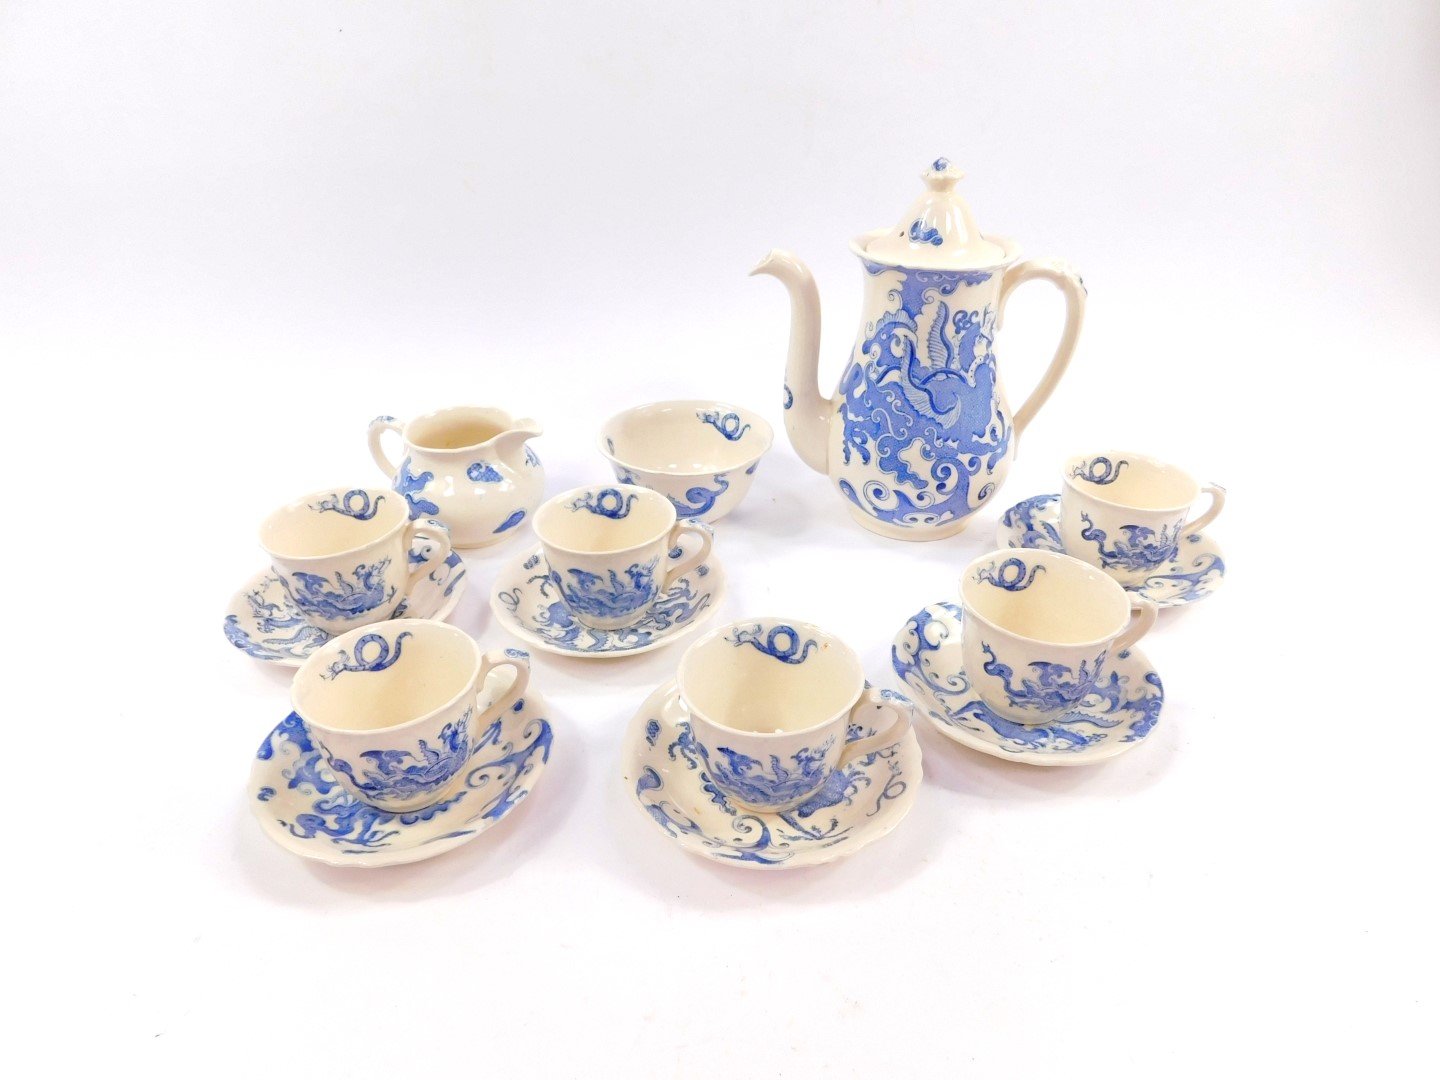 An early 20thC Royal Worcester Regency ware part coffee service, decorated in blue and white with